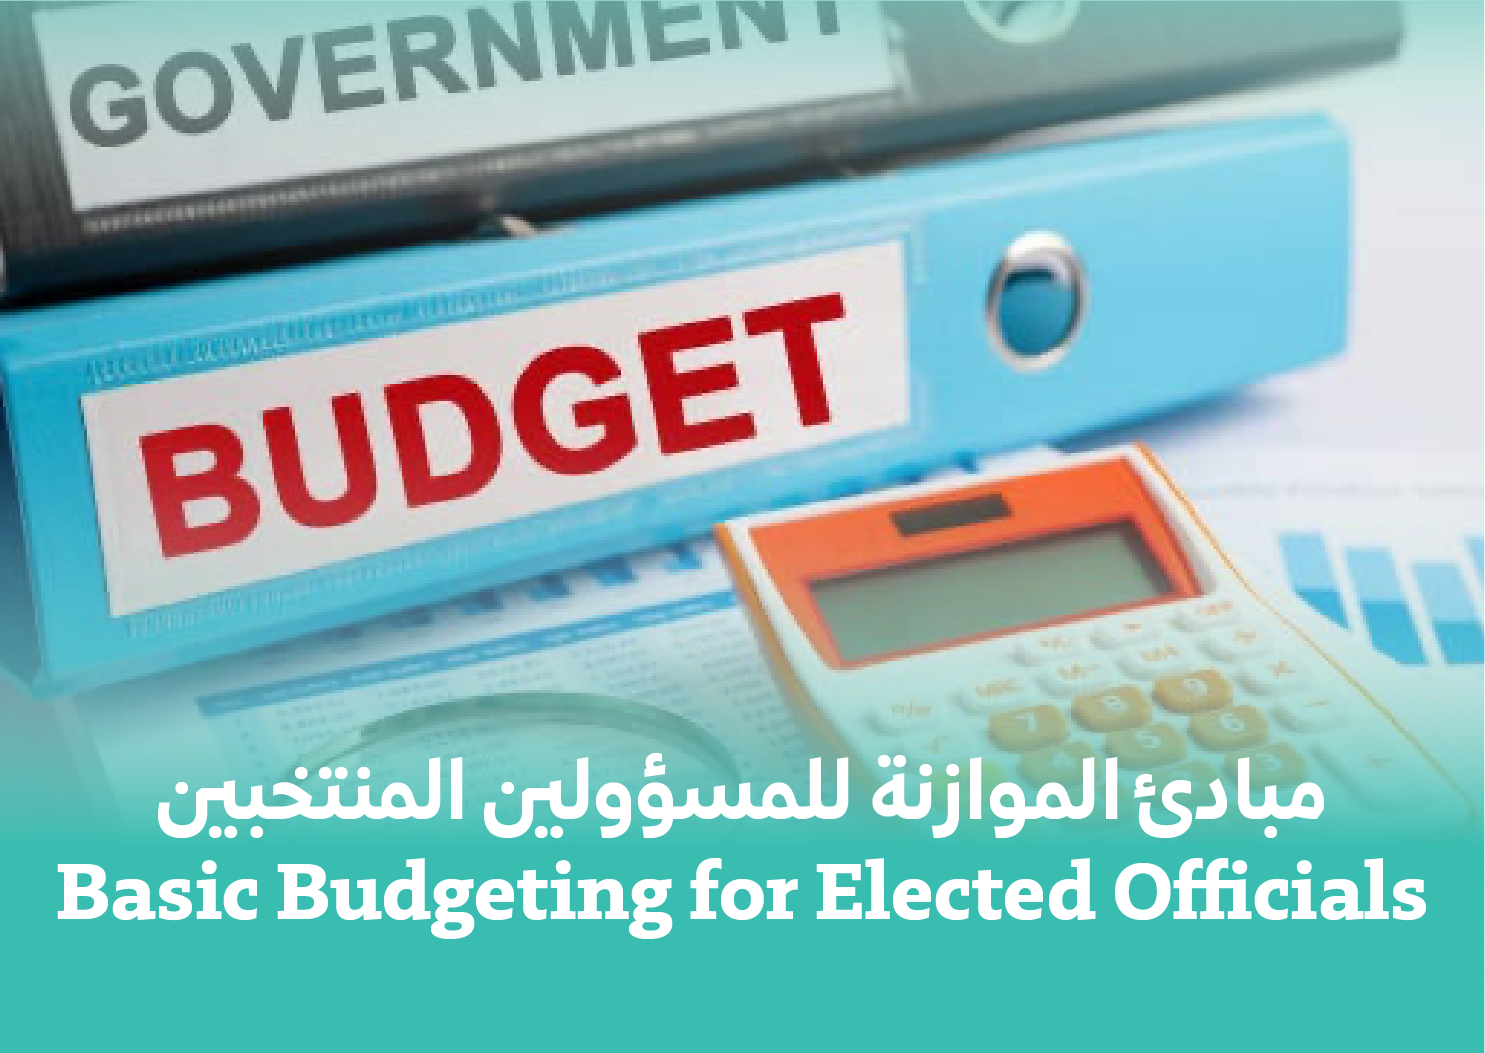 Basic Budgeting for Elected Officials